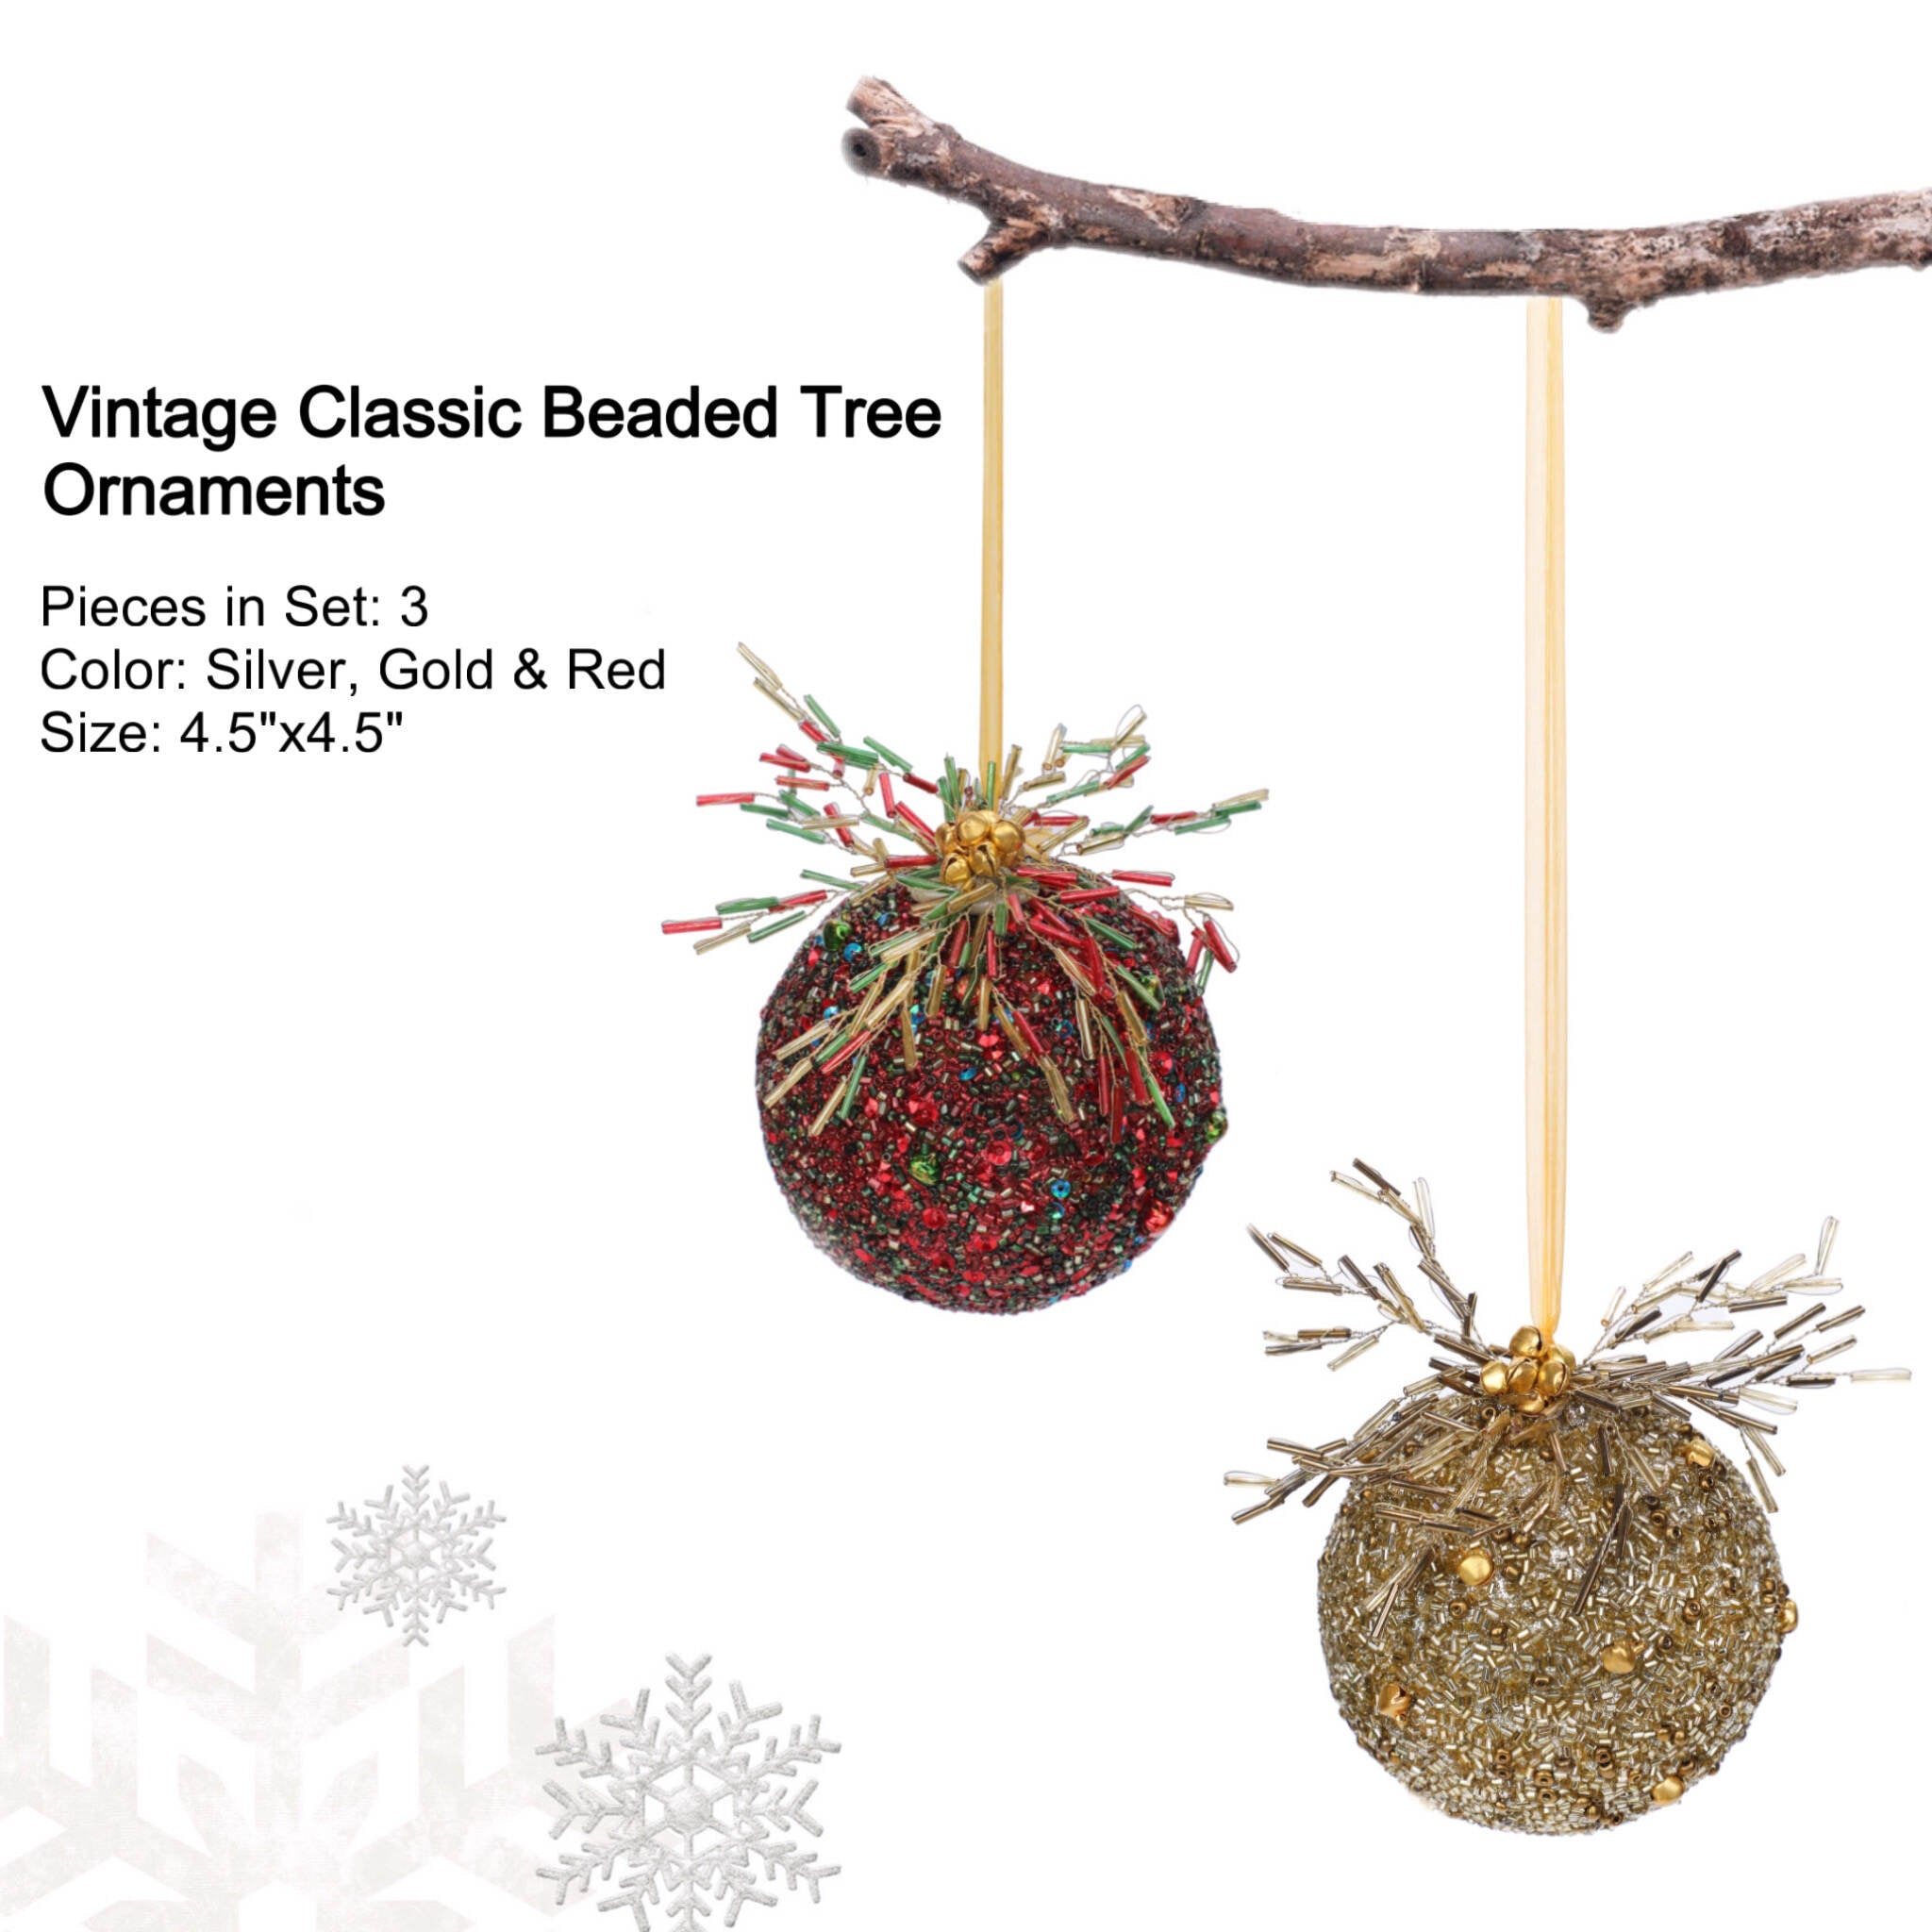 Vintage Classic Beaded Tree Ornaments in Red, Gold & Silver, Boxed Set of 3